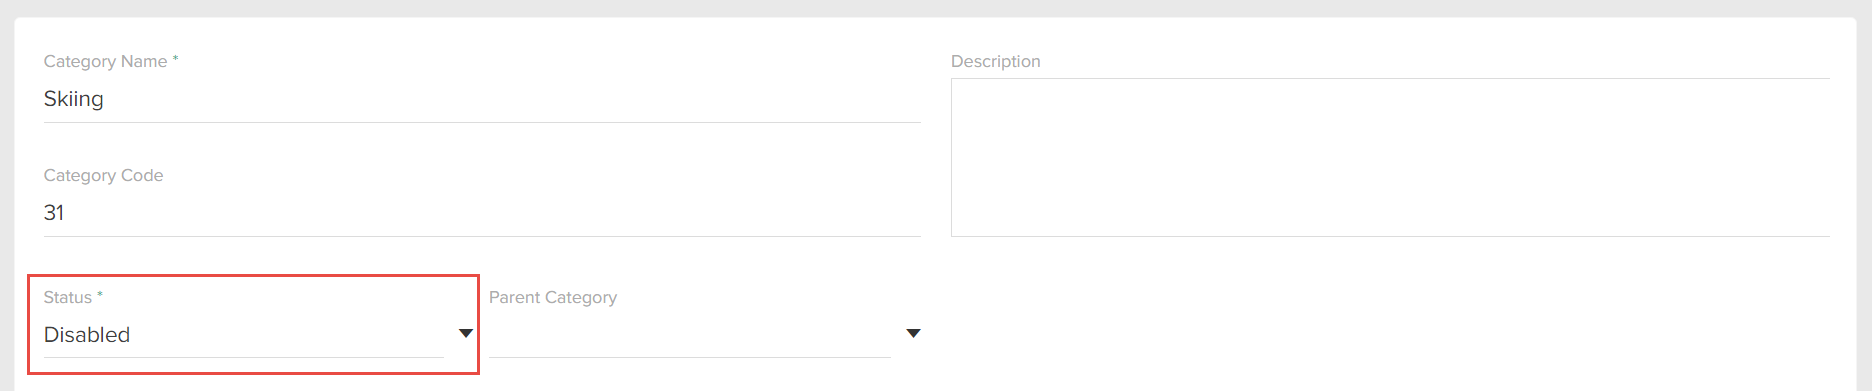 Category configurations with a callout for the Disabled status option